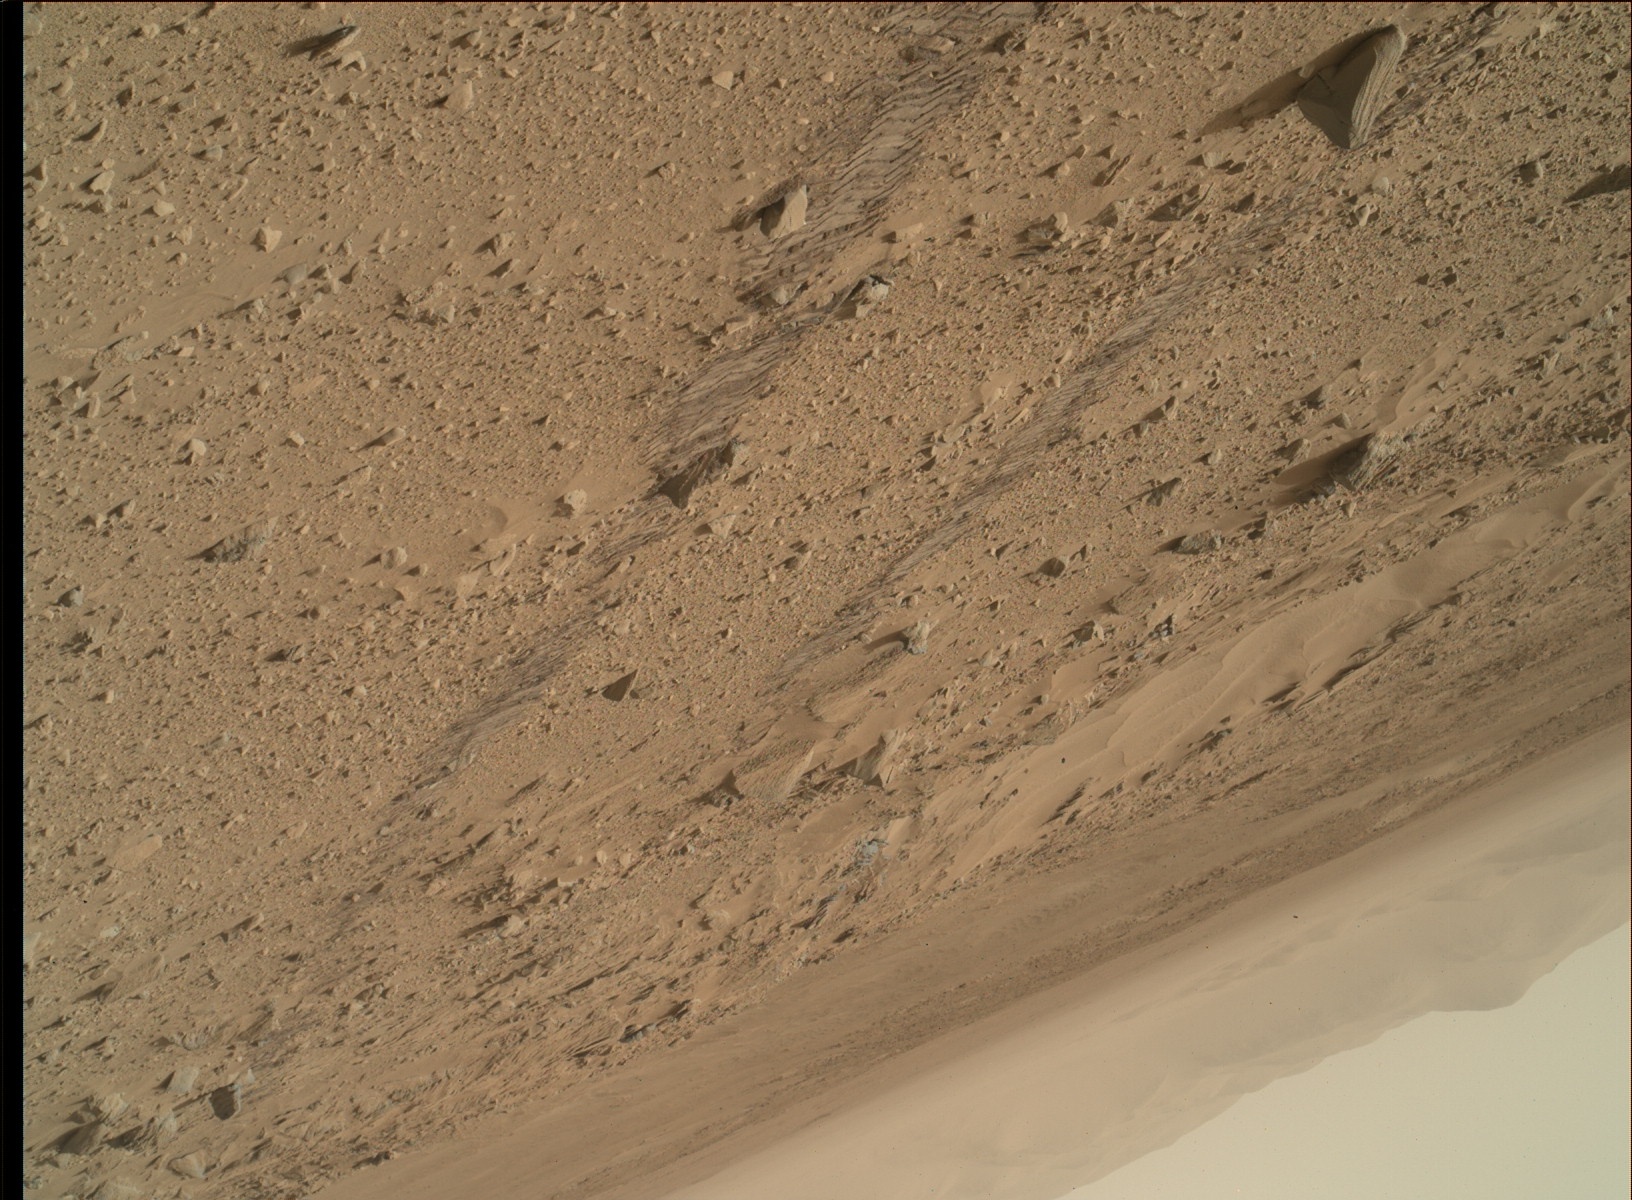 Nasa's Mars rover Curiosity acquired this image using its Mars Hand Lens Imager (MAHLI) on Sol 705